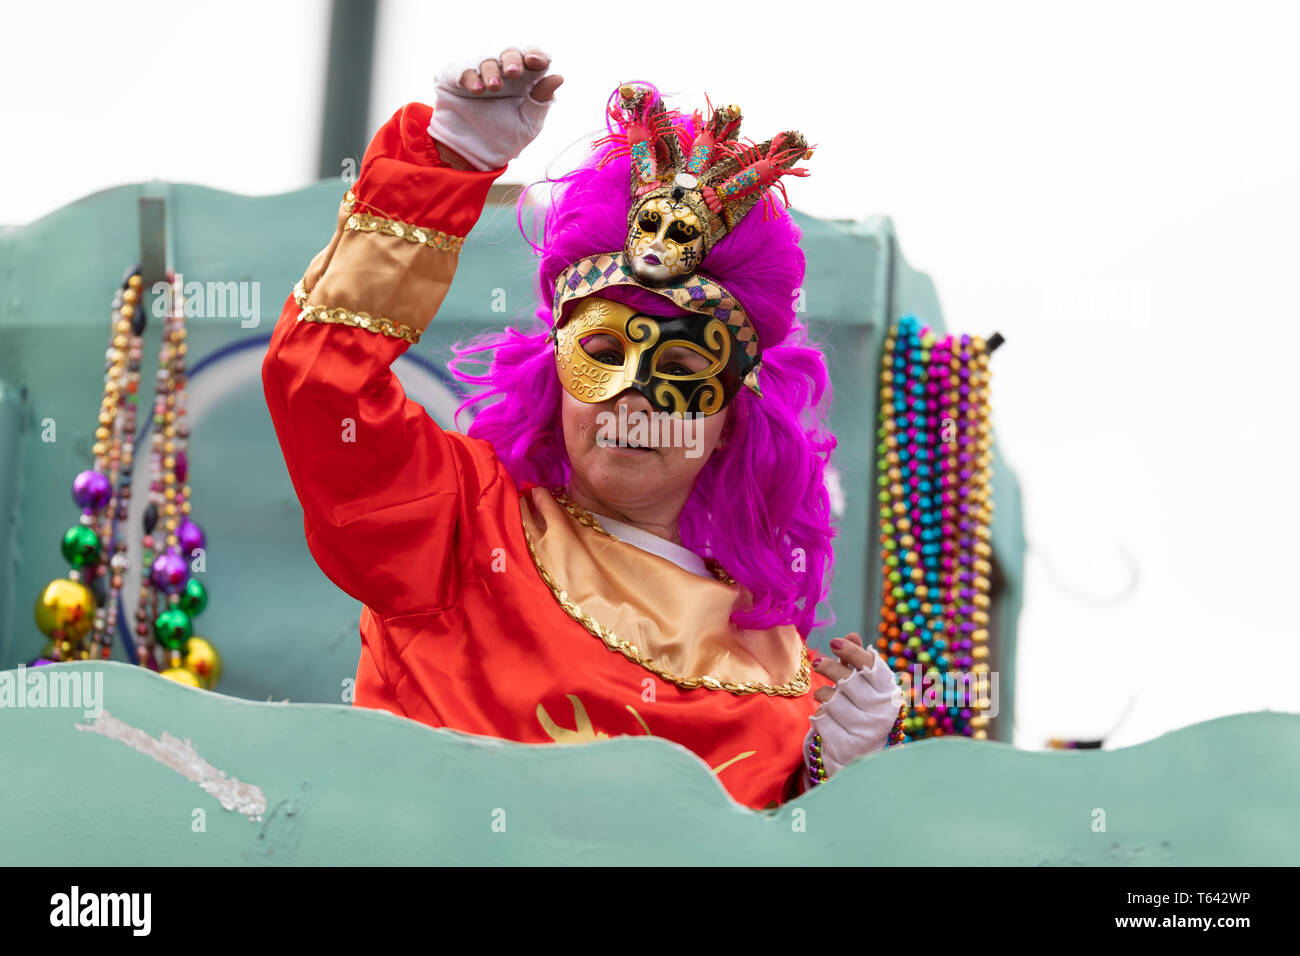 New Orleans, Louisiana, USA - February 23, 2019: Mardi Gras Parade, Woman wearing traditional clothing, throwing beads to the spectators during the ma Stock Photo